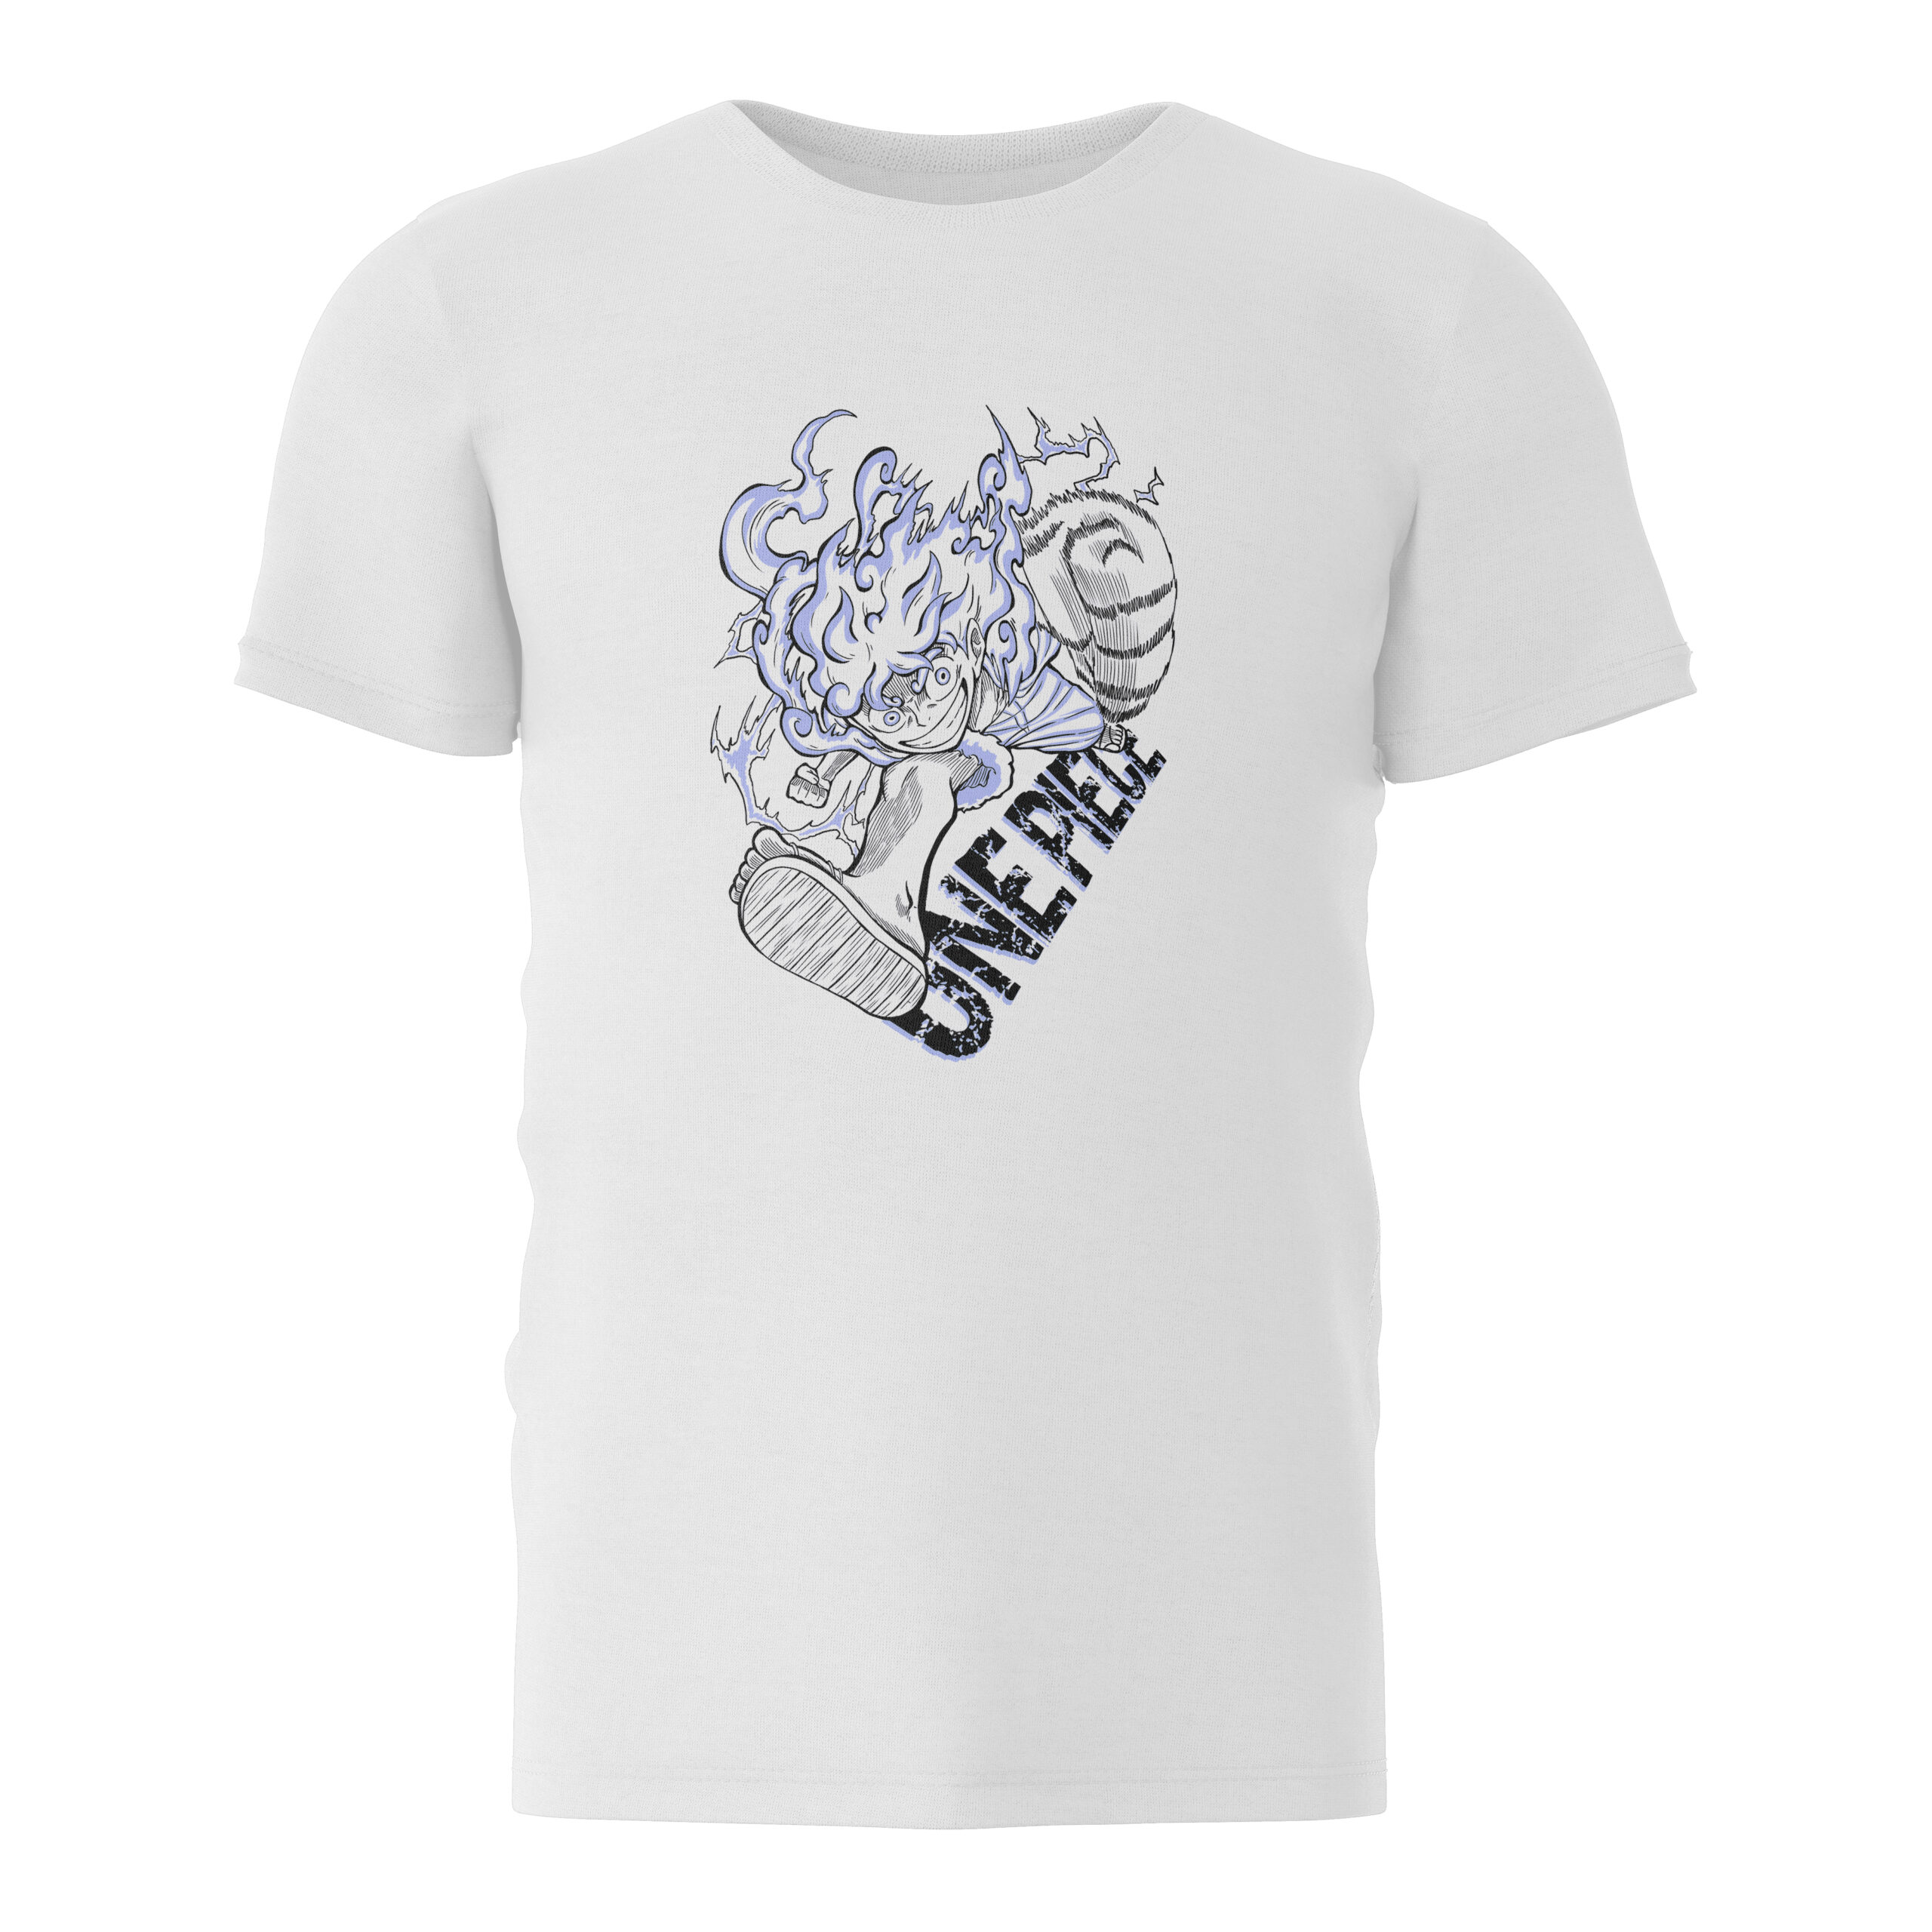 One Piece Luffy Gear Five T-Shirt - ALTERCOS - Buy Online - Only €9.99